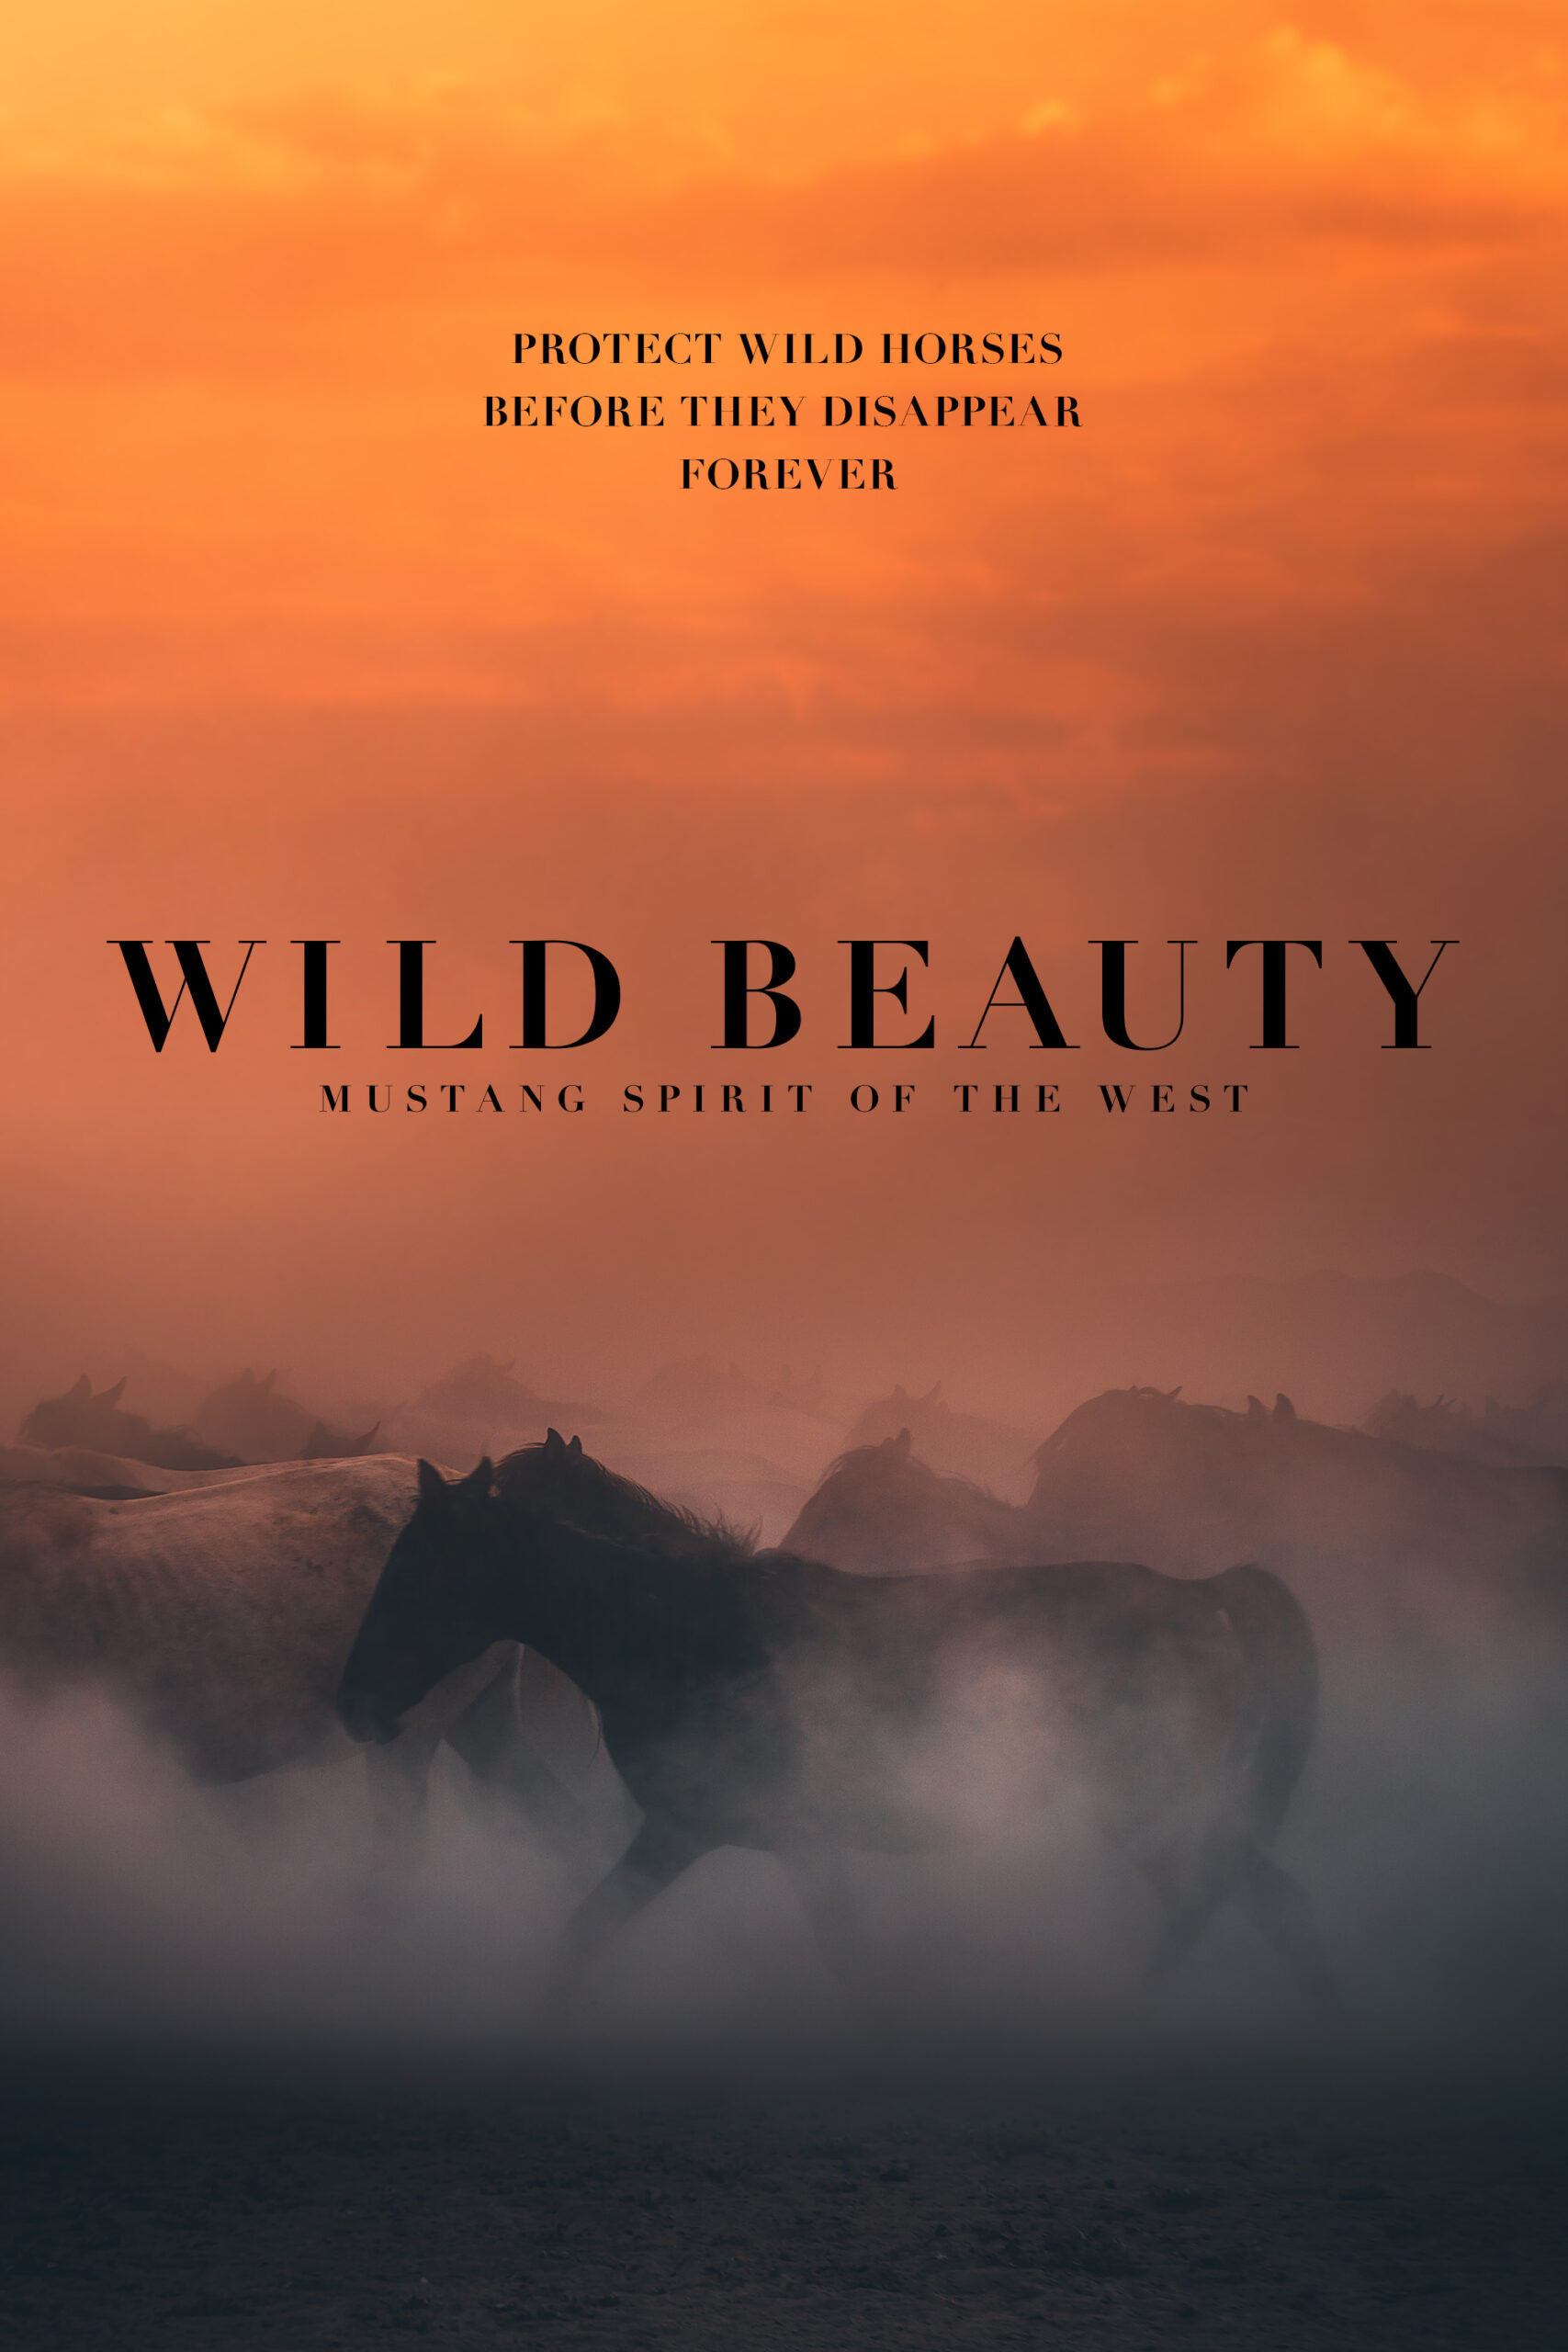 FILM REVIEW: WILD BEAUTY: MUSTANG SPIRIT OF THE WEST